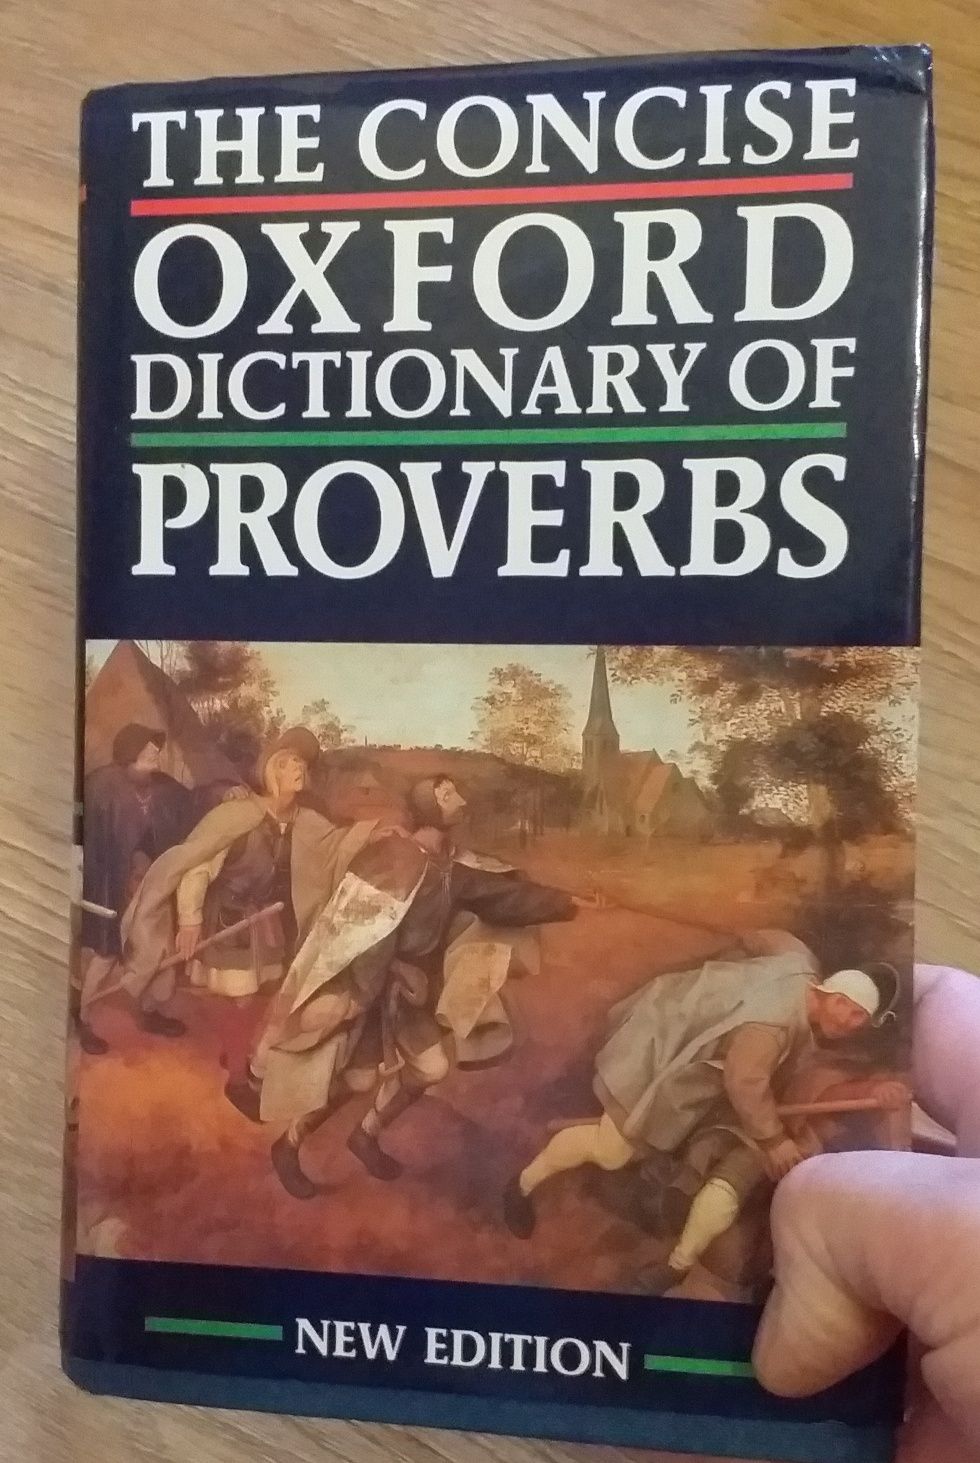 The consise Oxford dictionary of proverbs